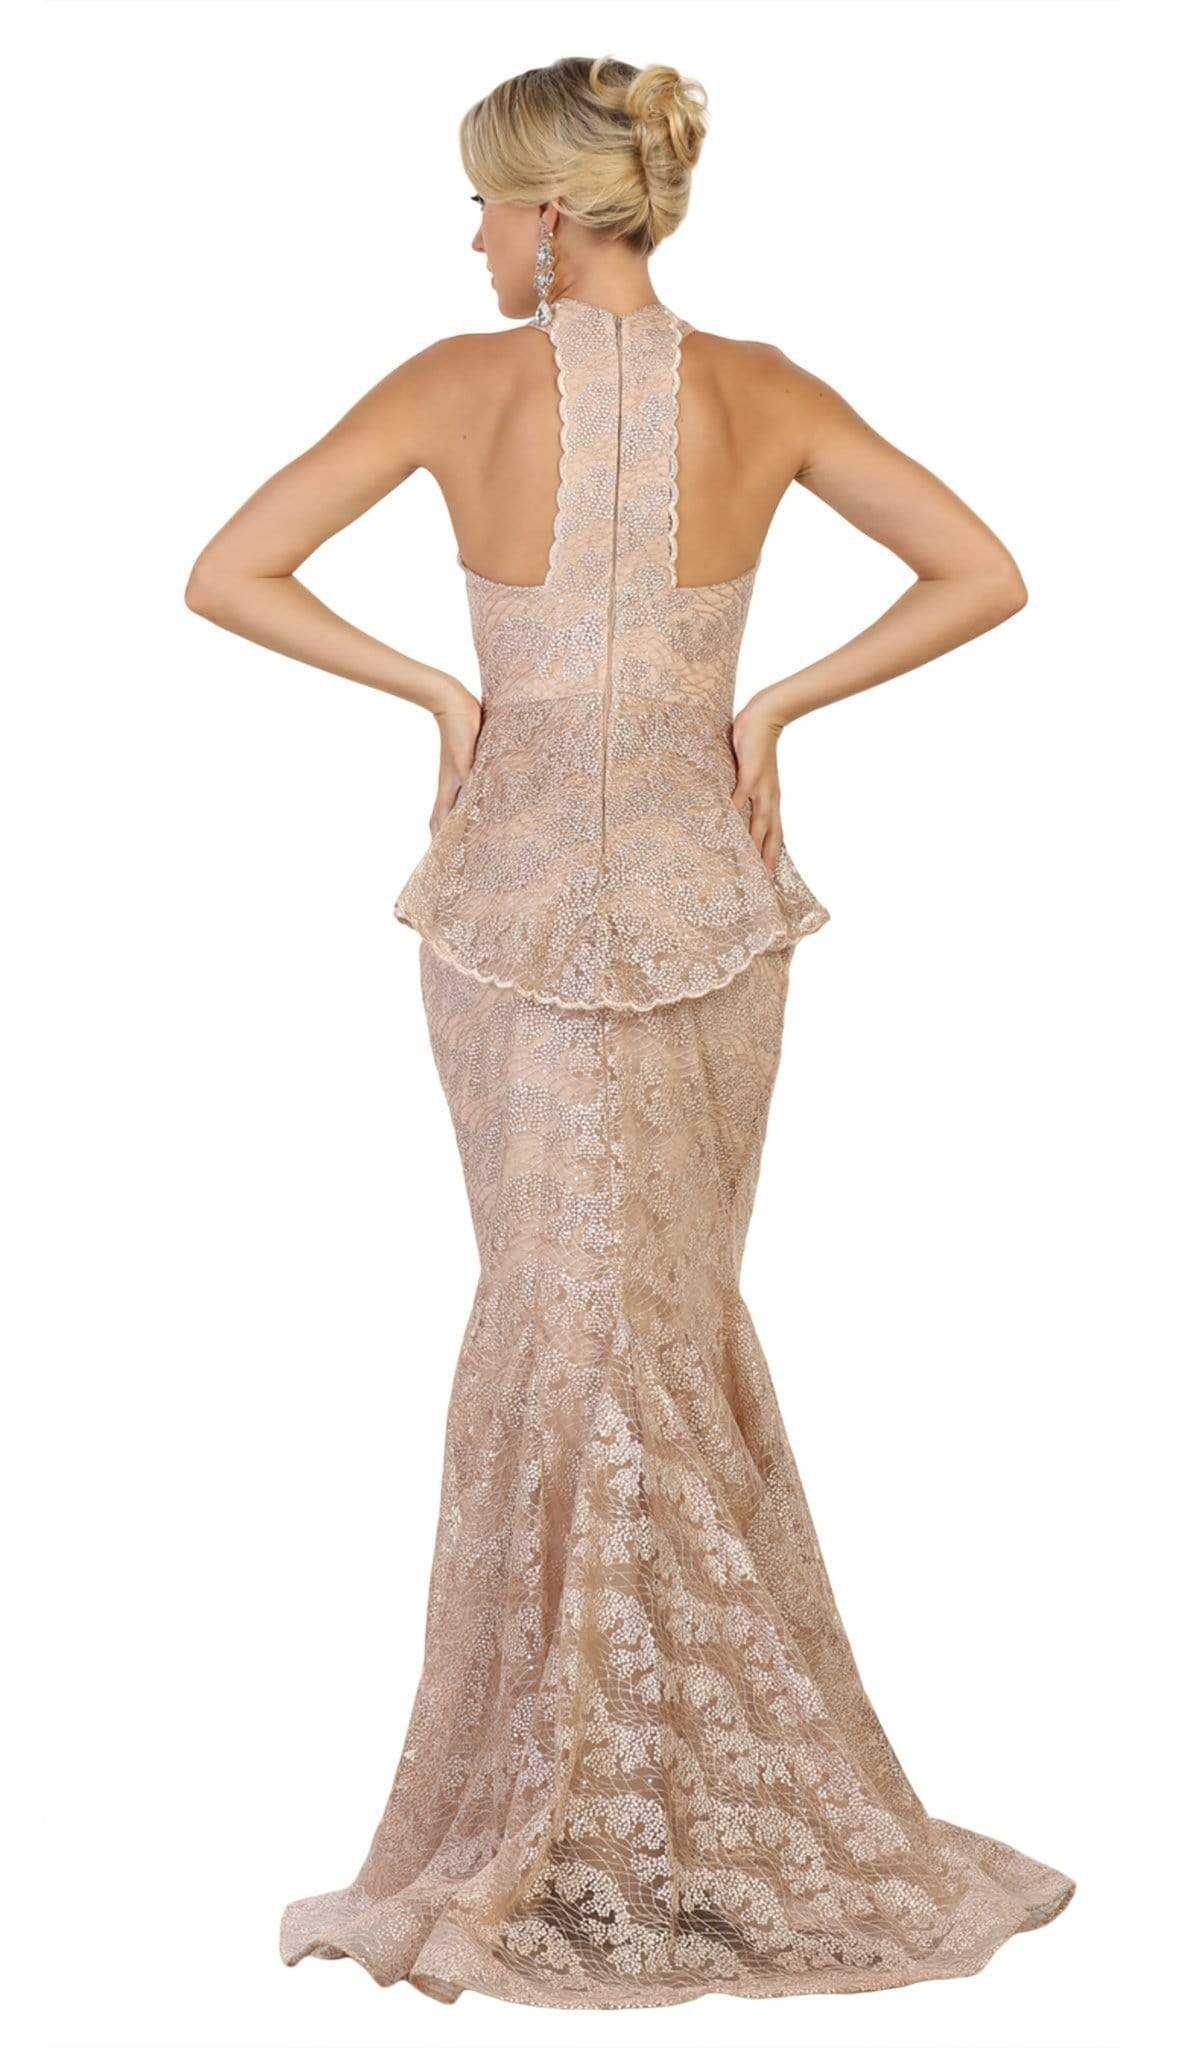 May Queen, May Queen - Scalloped Plunging Halter V-Neck Mermaid Gown RQ7608 - 1 pc Champagne In Size 18 Available